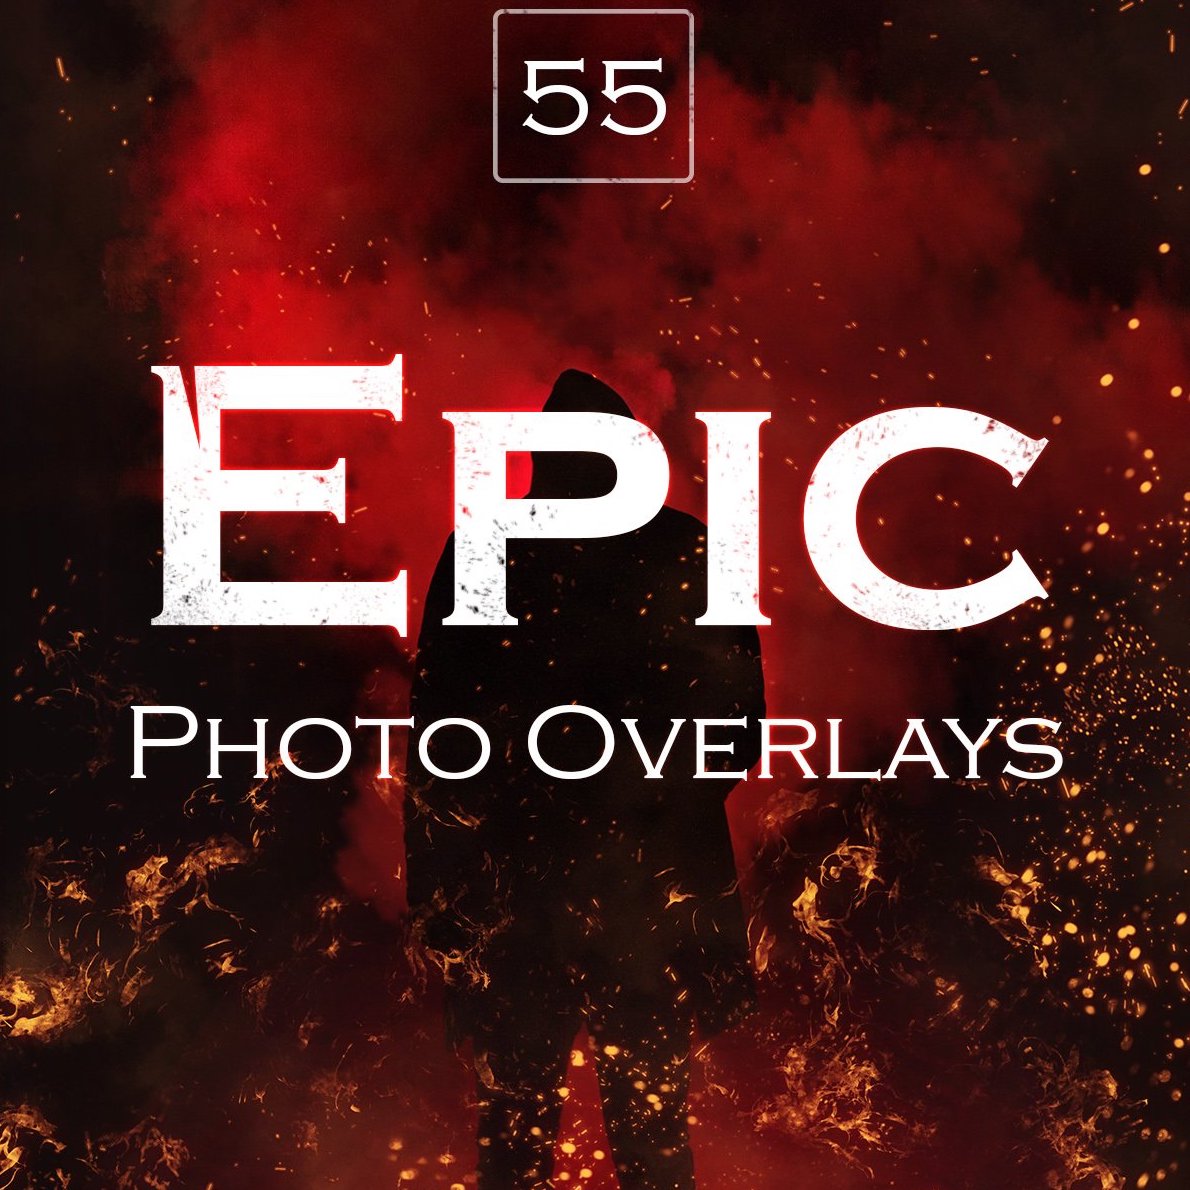 55 epic photo overlays cover image.